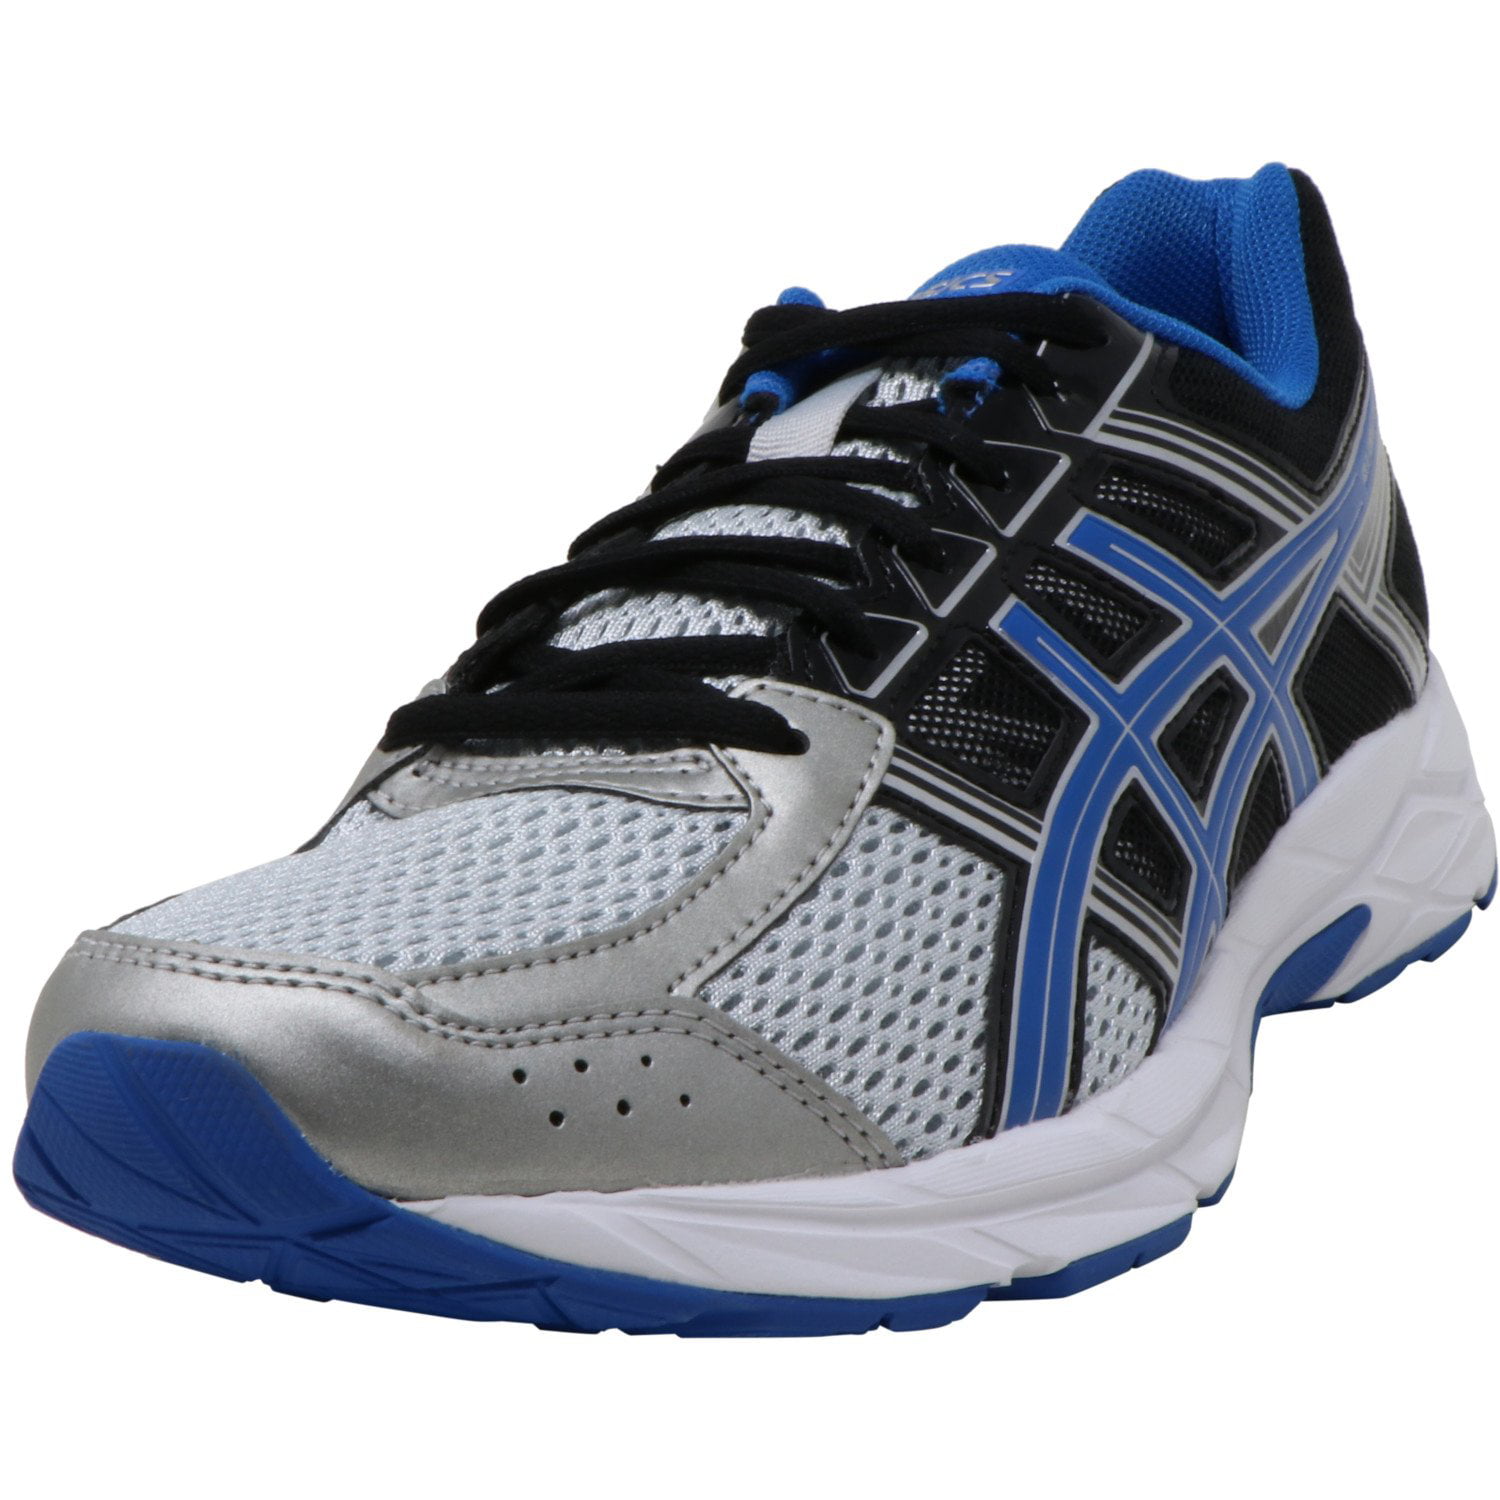 Men's Gel-Contend Silver / Classic Blue Black Ankle-High Running - 7.5M -